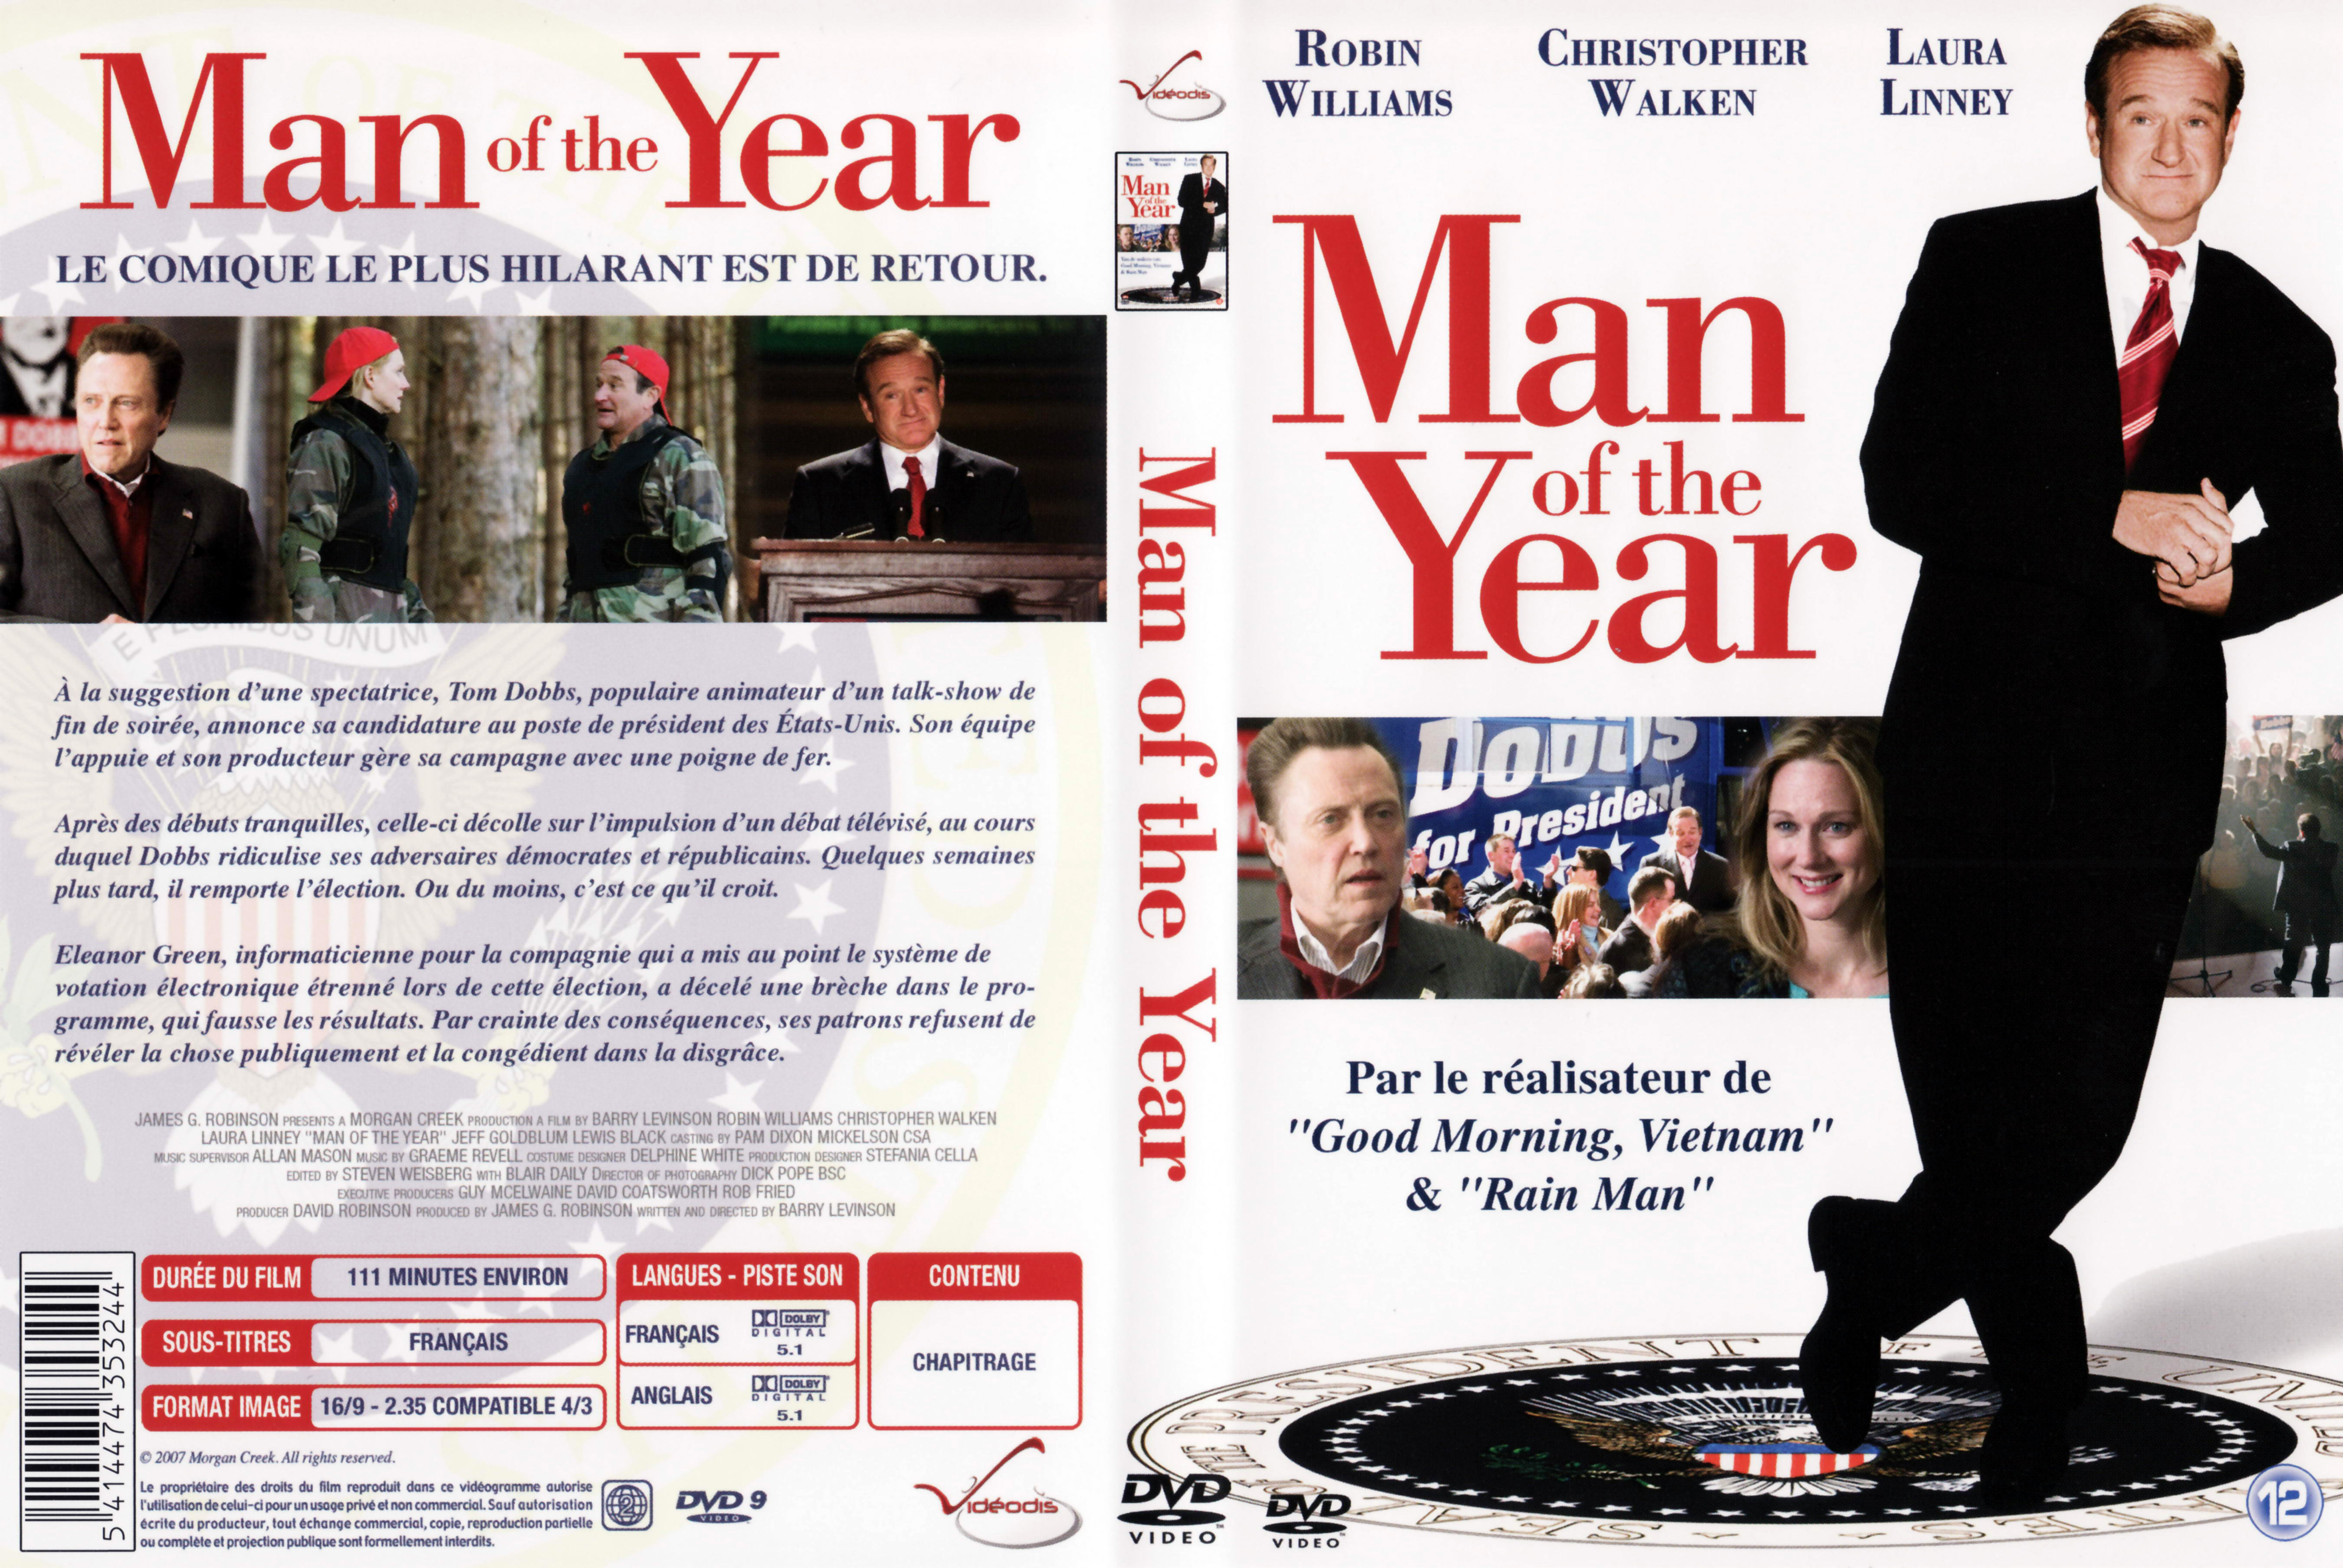 Jaquette DVD Man of the year